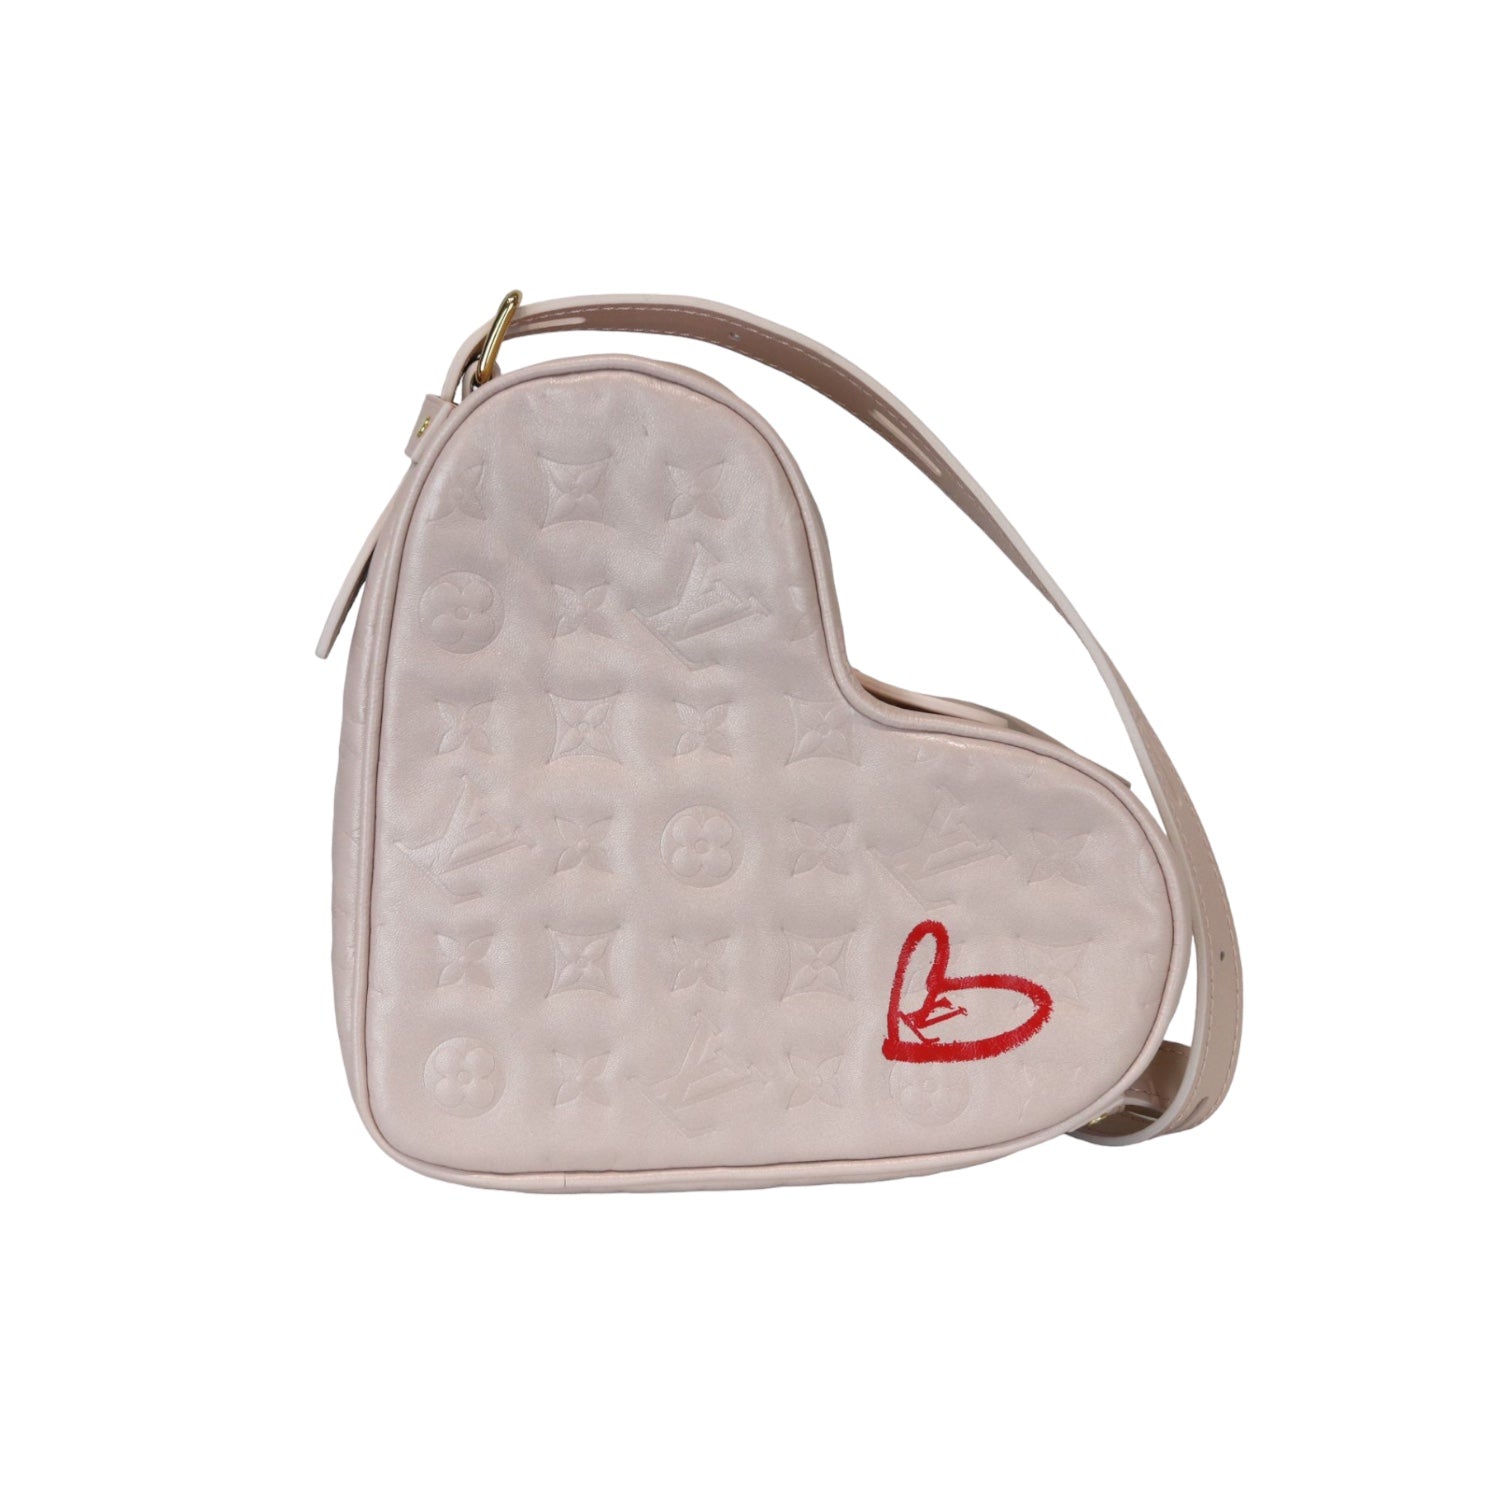 Louis Vuitton Coeur Heart Bag Game On Monogram in Coated Canvas